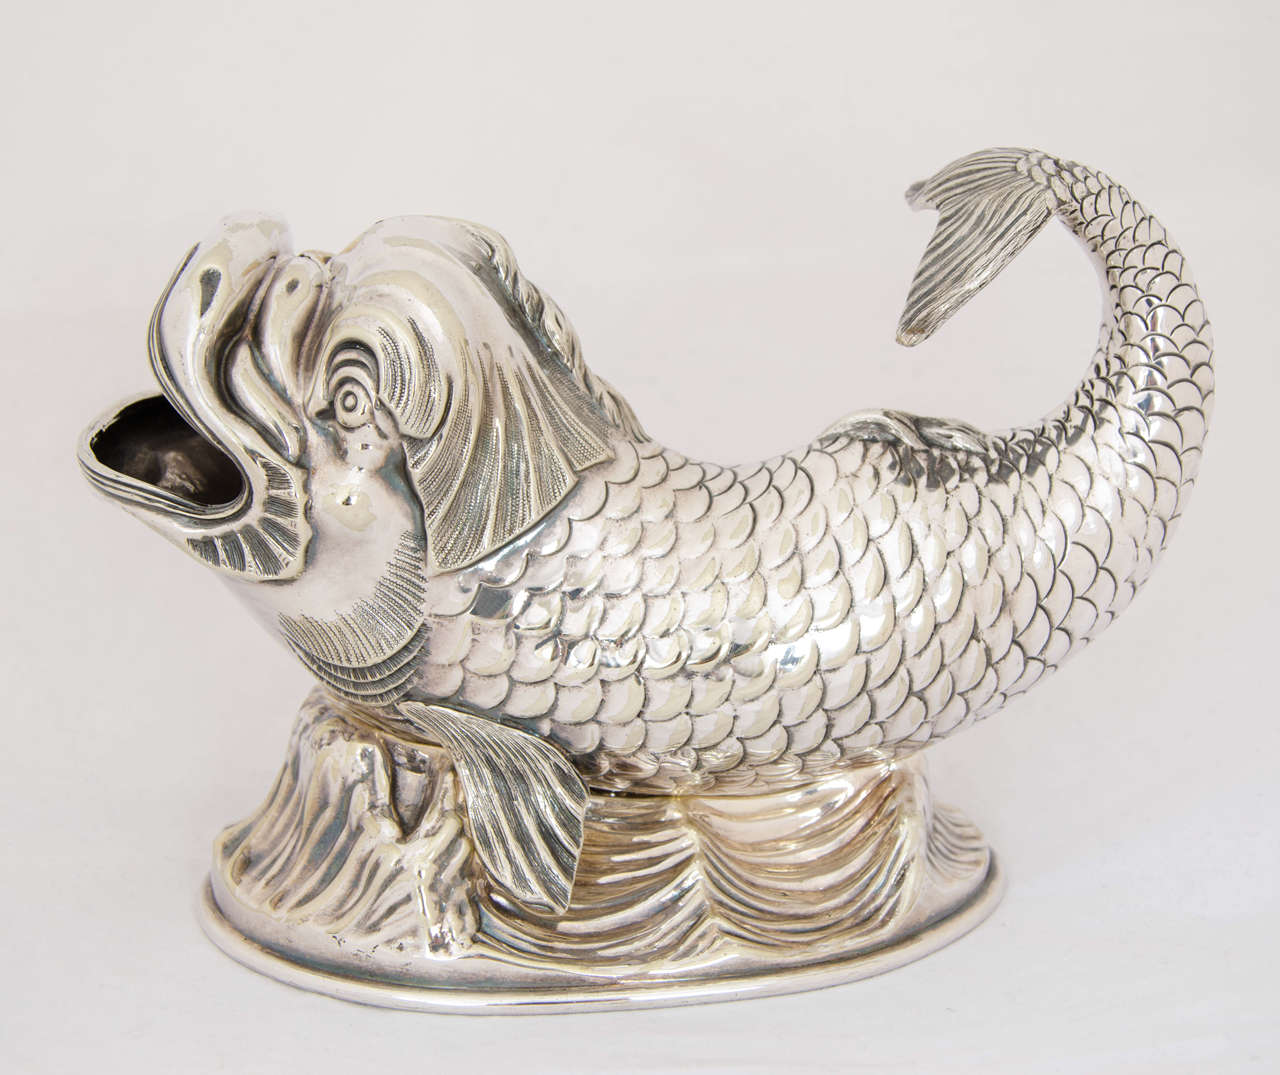 A delightful Silver-plated Spoon Warmer in the form of a fish, circa 1890
Made by James Dixon & Son.
Length is 21cms.